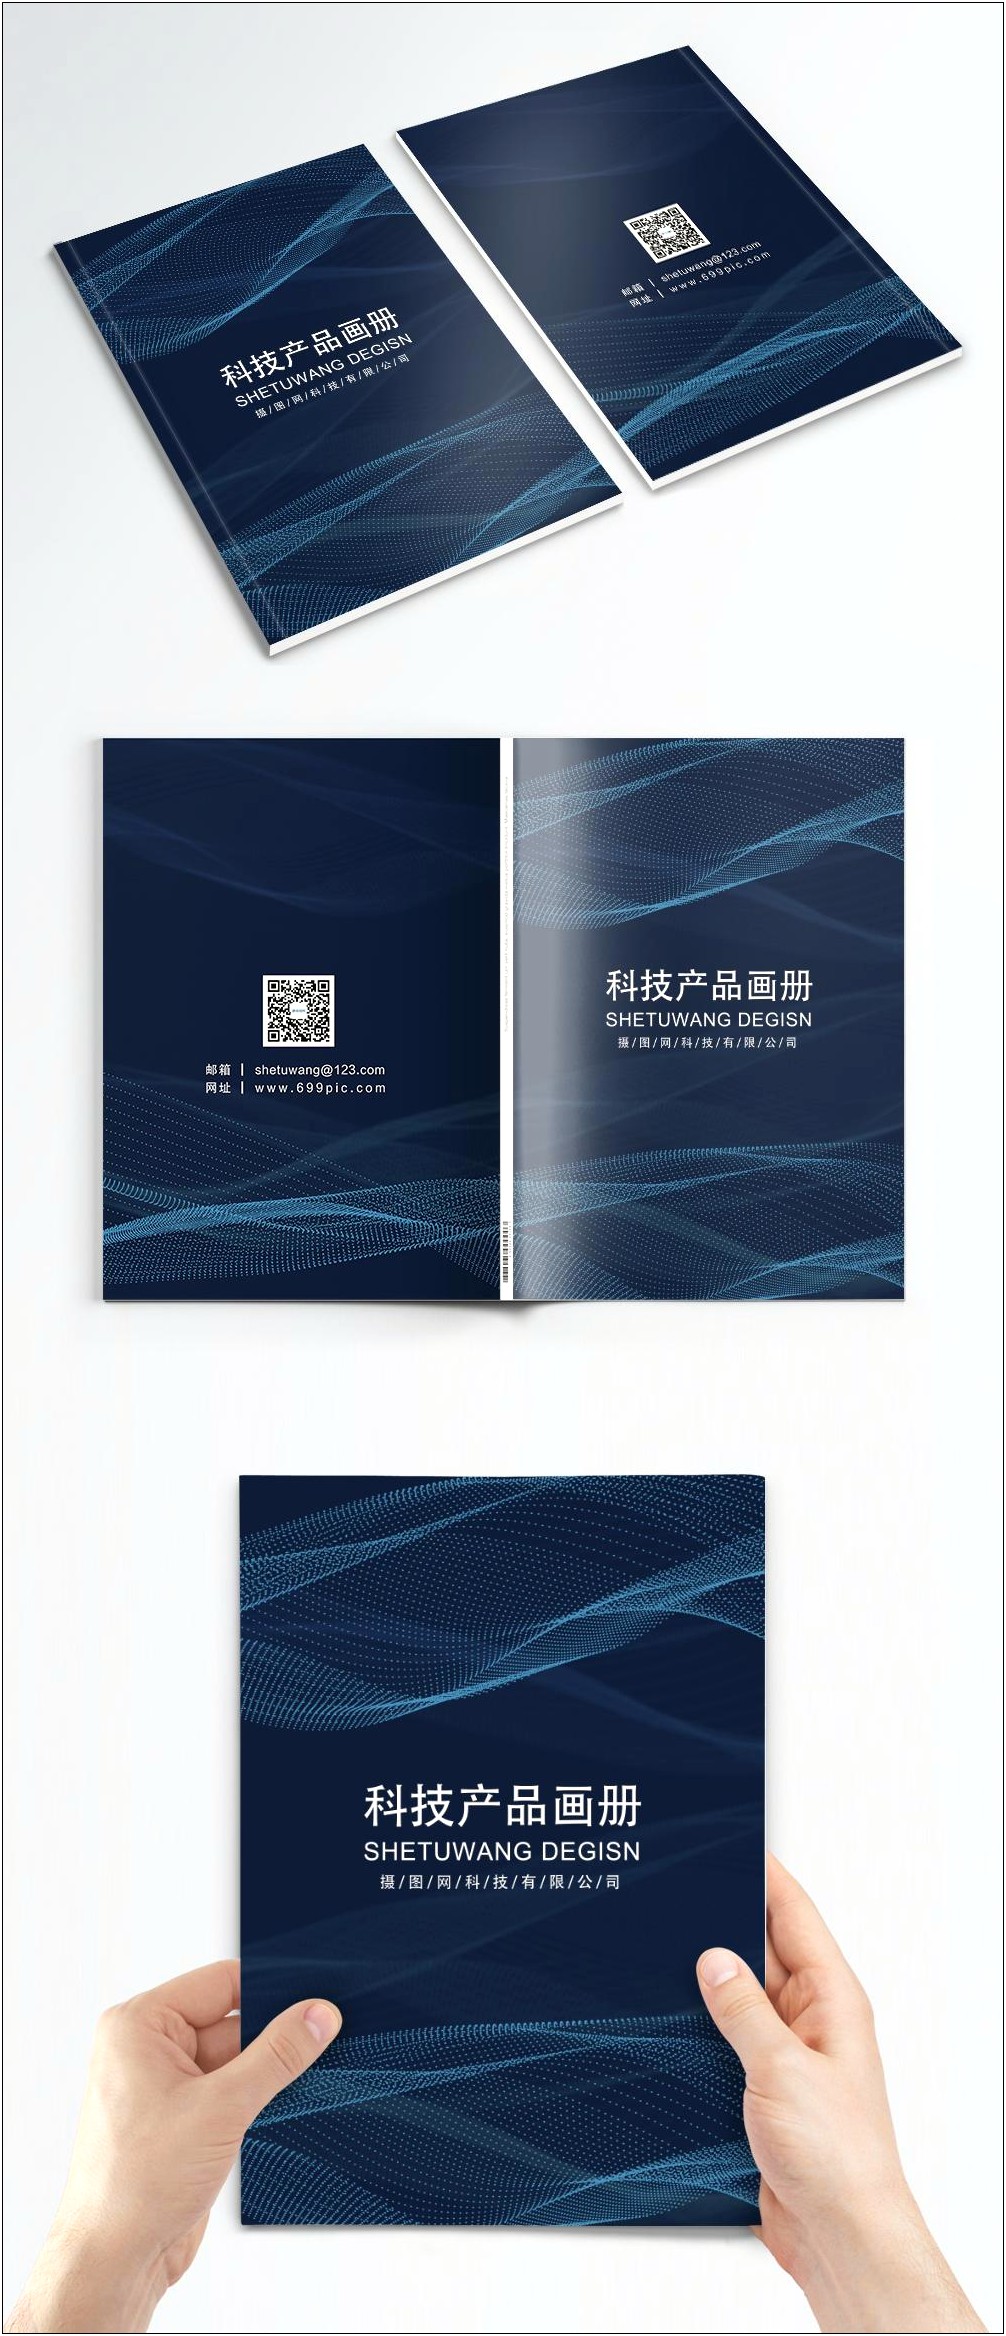 Technology Company Brochure Template Free Download